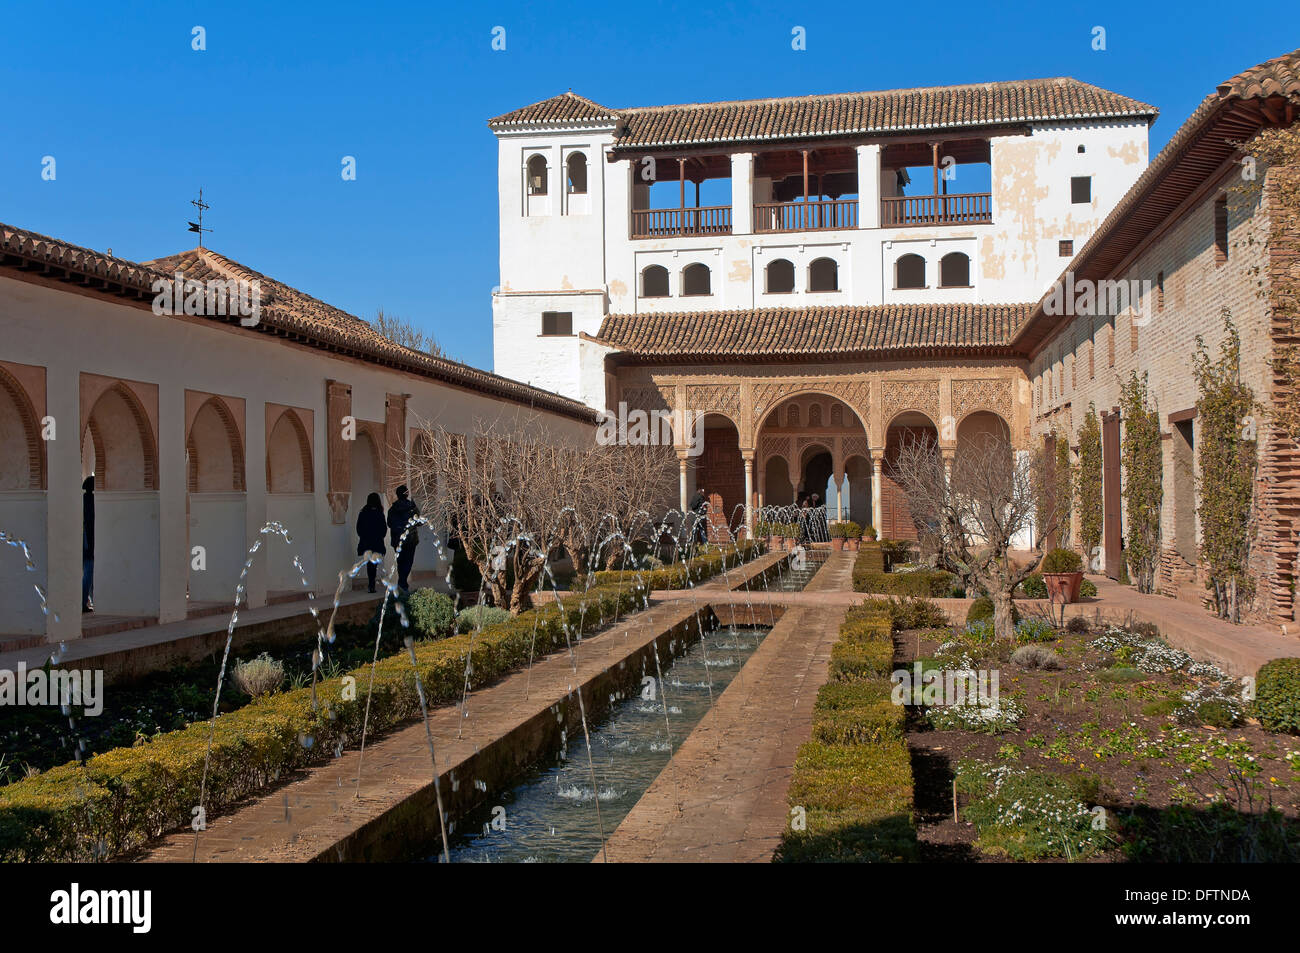 Generalife Palace and Court of the Acequia, Generalife, Alhambra, Granada, Region of Andalusia, Spain, Europe Stock Photo